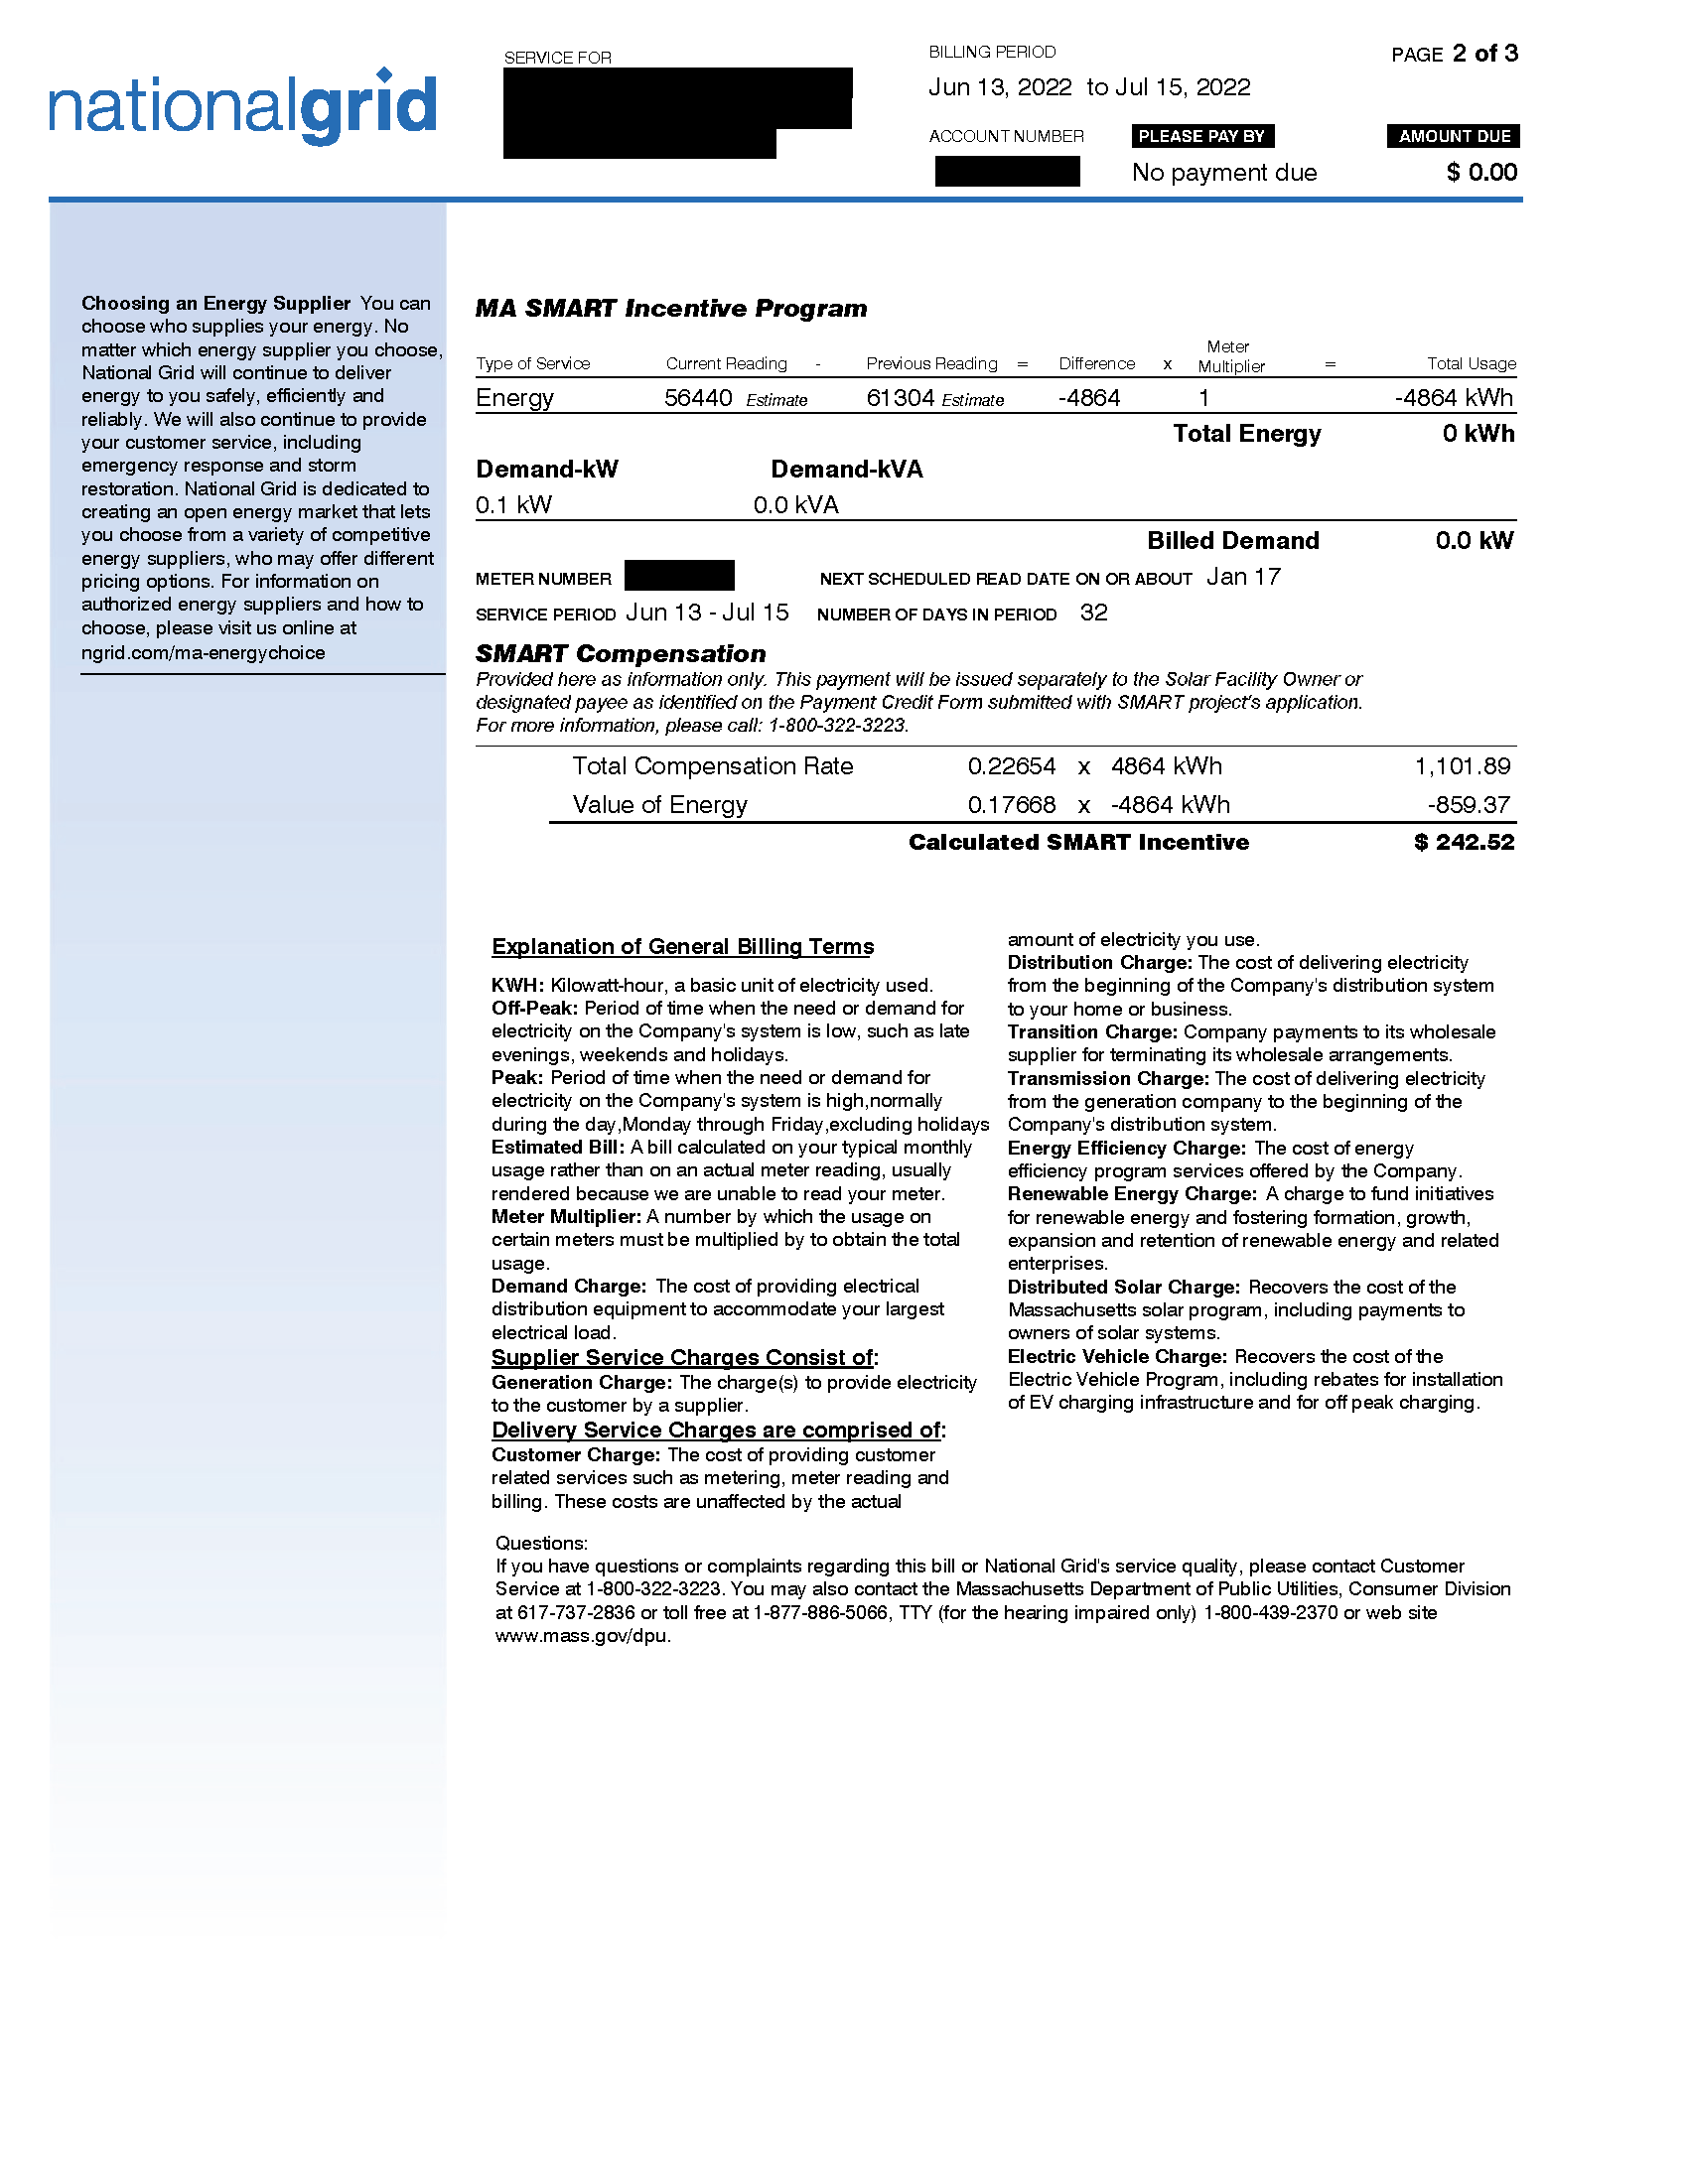 MA SMART Qualifying Facility Behind the Meter Bill   - Page Two